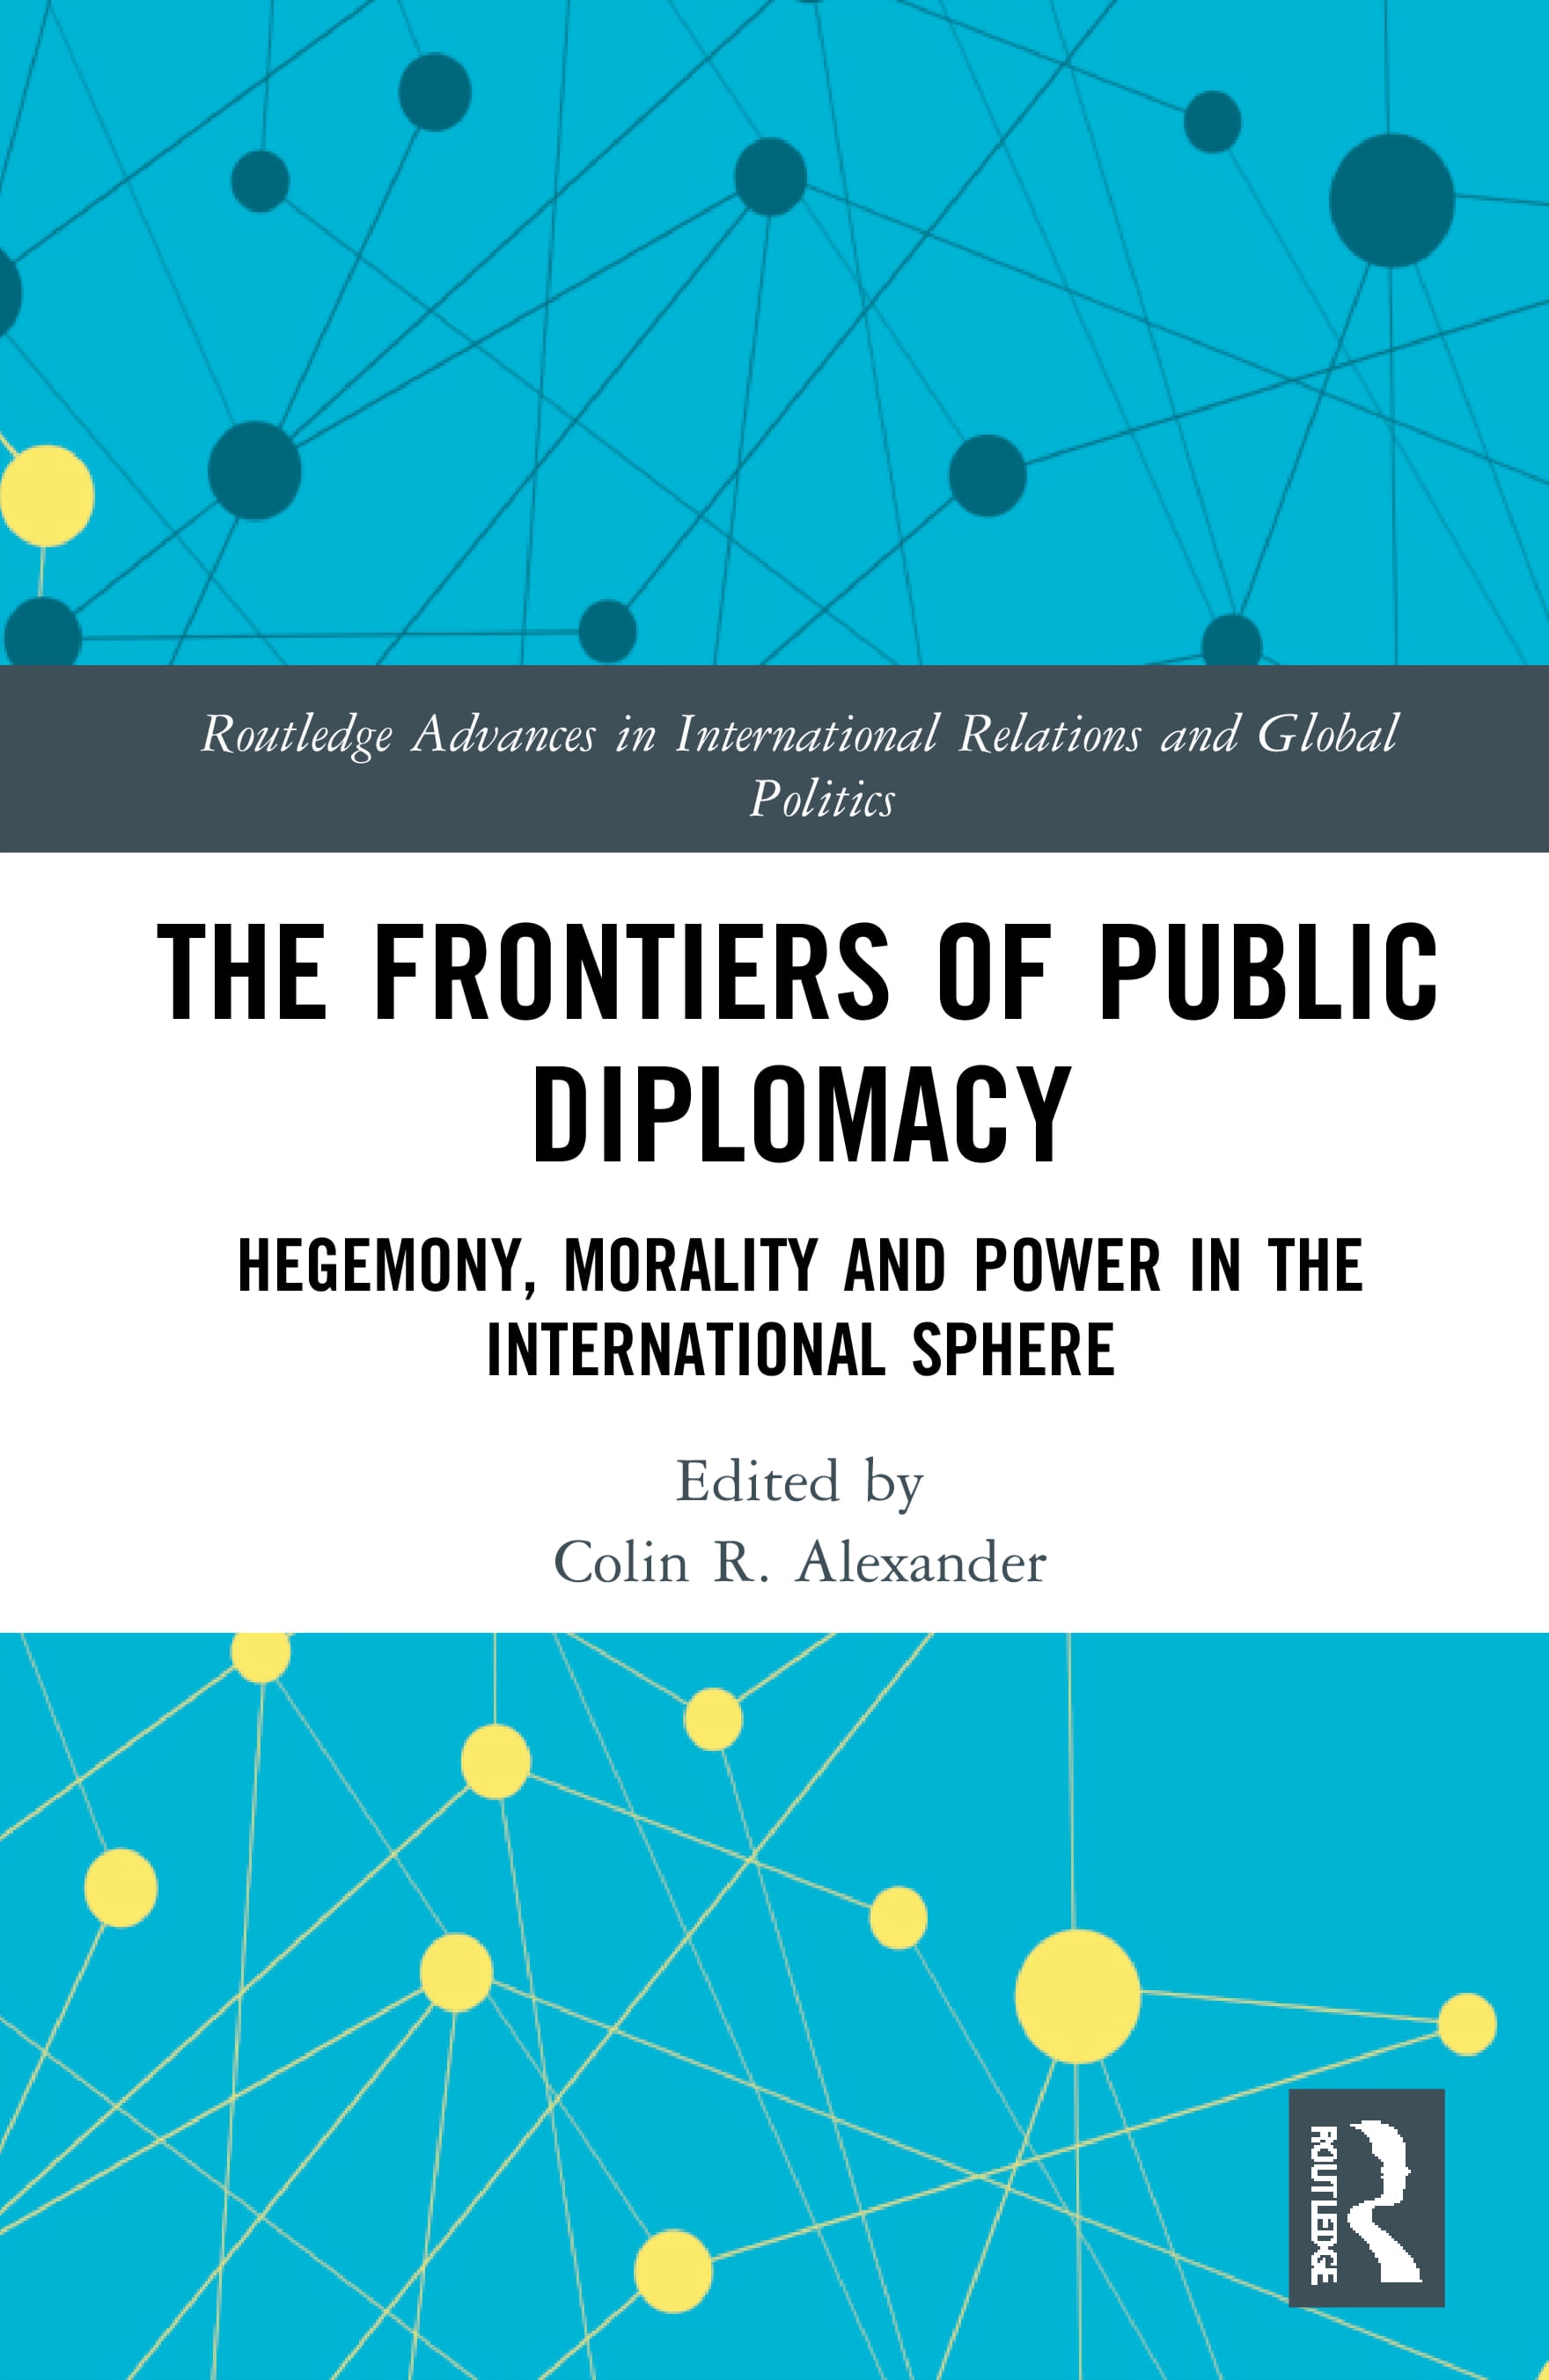 Frontiers of Public Diplomacy: Hegemony, Morality and Power in the International Sphere